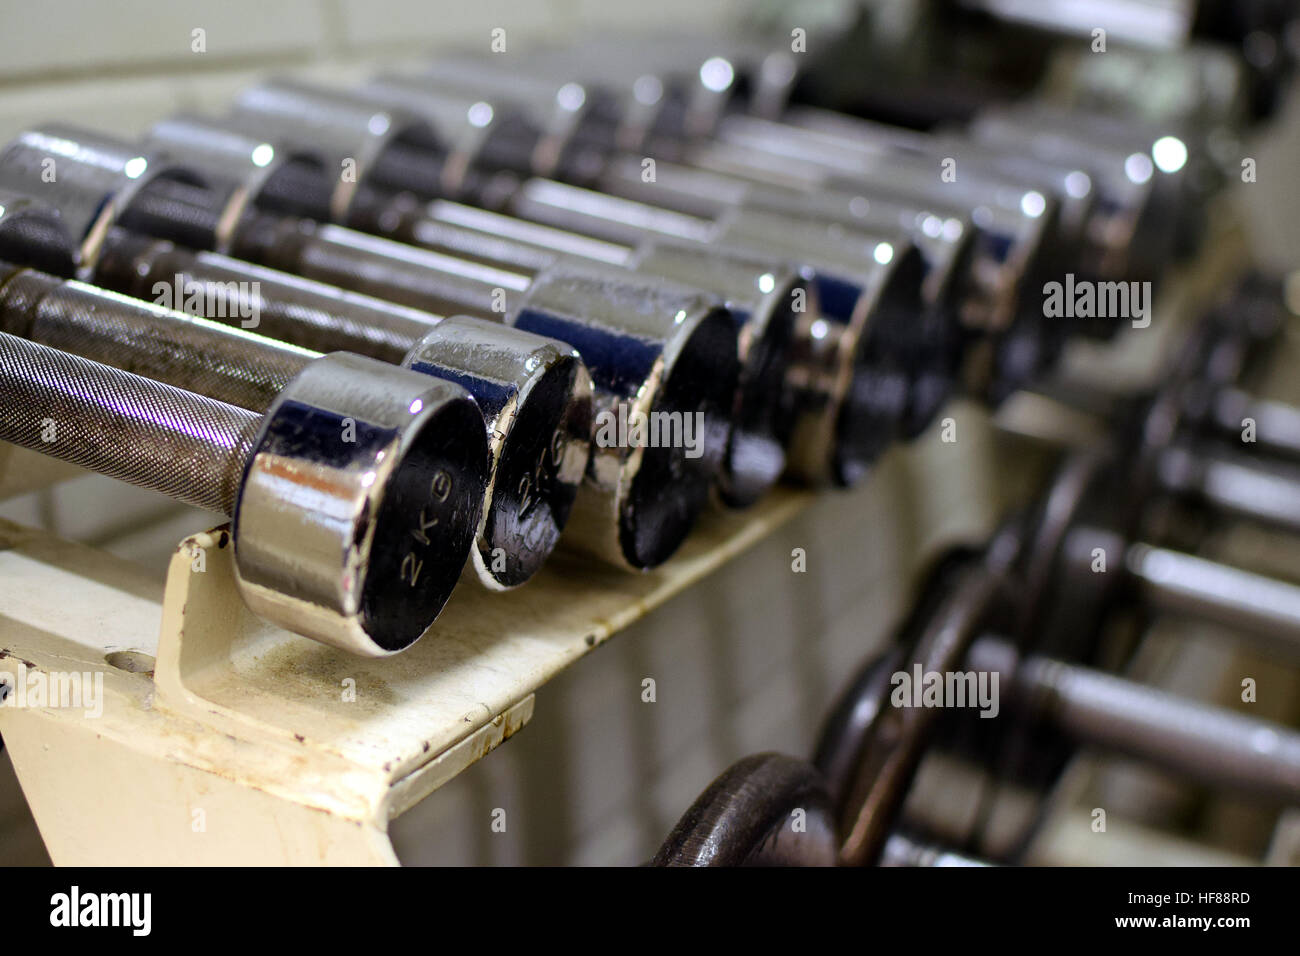 Rows of dumbbells in the gym. Stock Photo